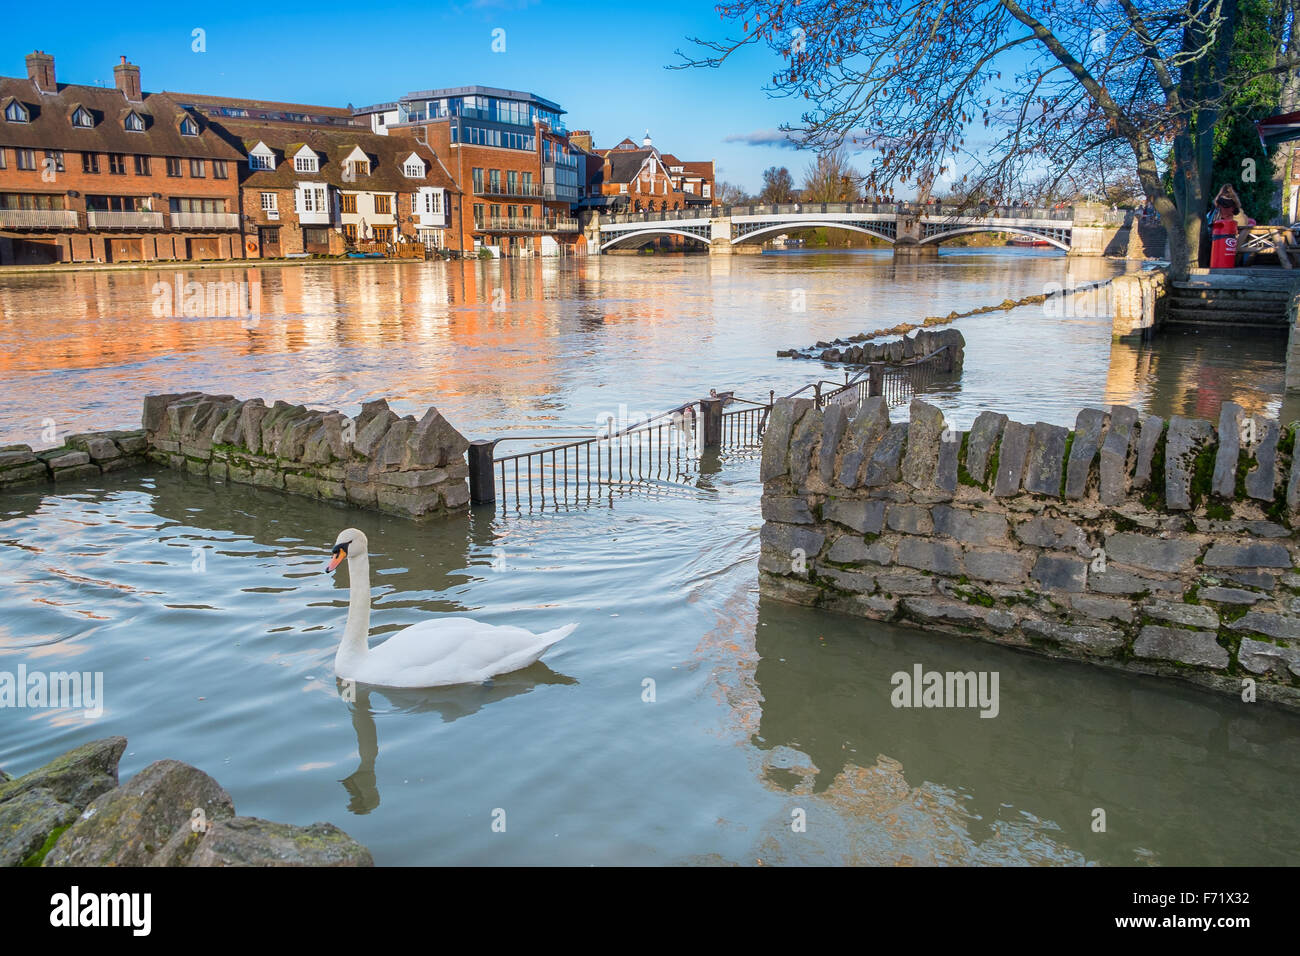 WINDSOR BERKSHIRE, UK- 11 January, 2014: View of Eton Bridge with a swan swimming on the flooded foot path on the river bank in Stock Photo